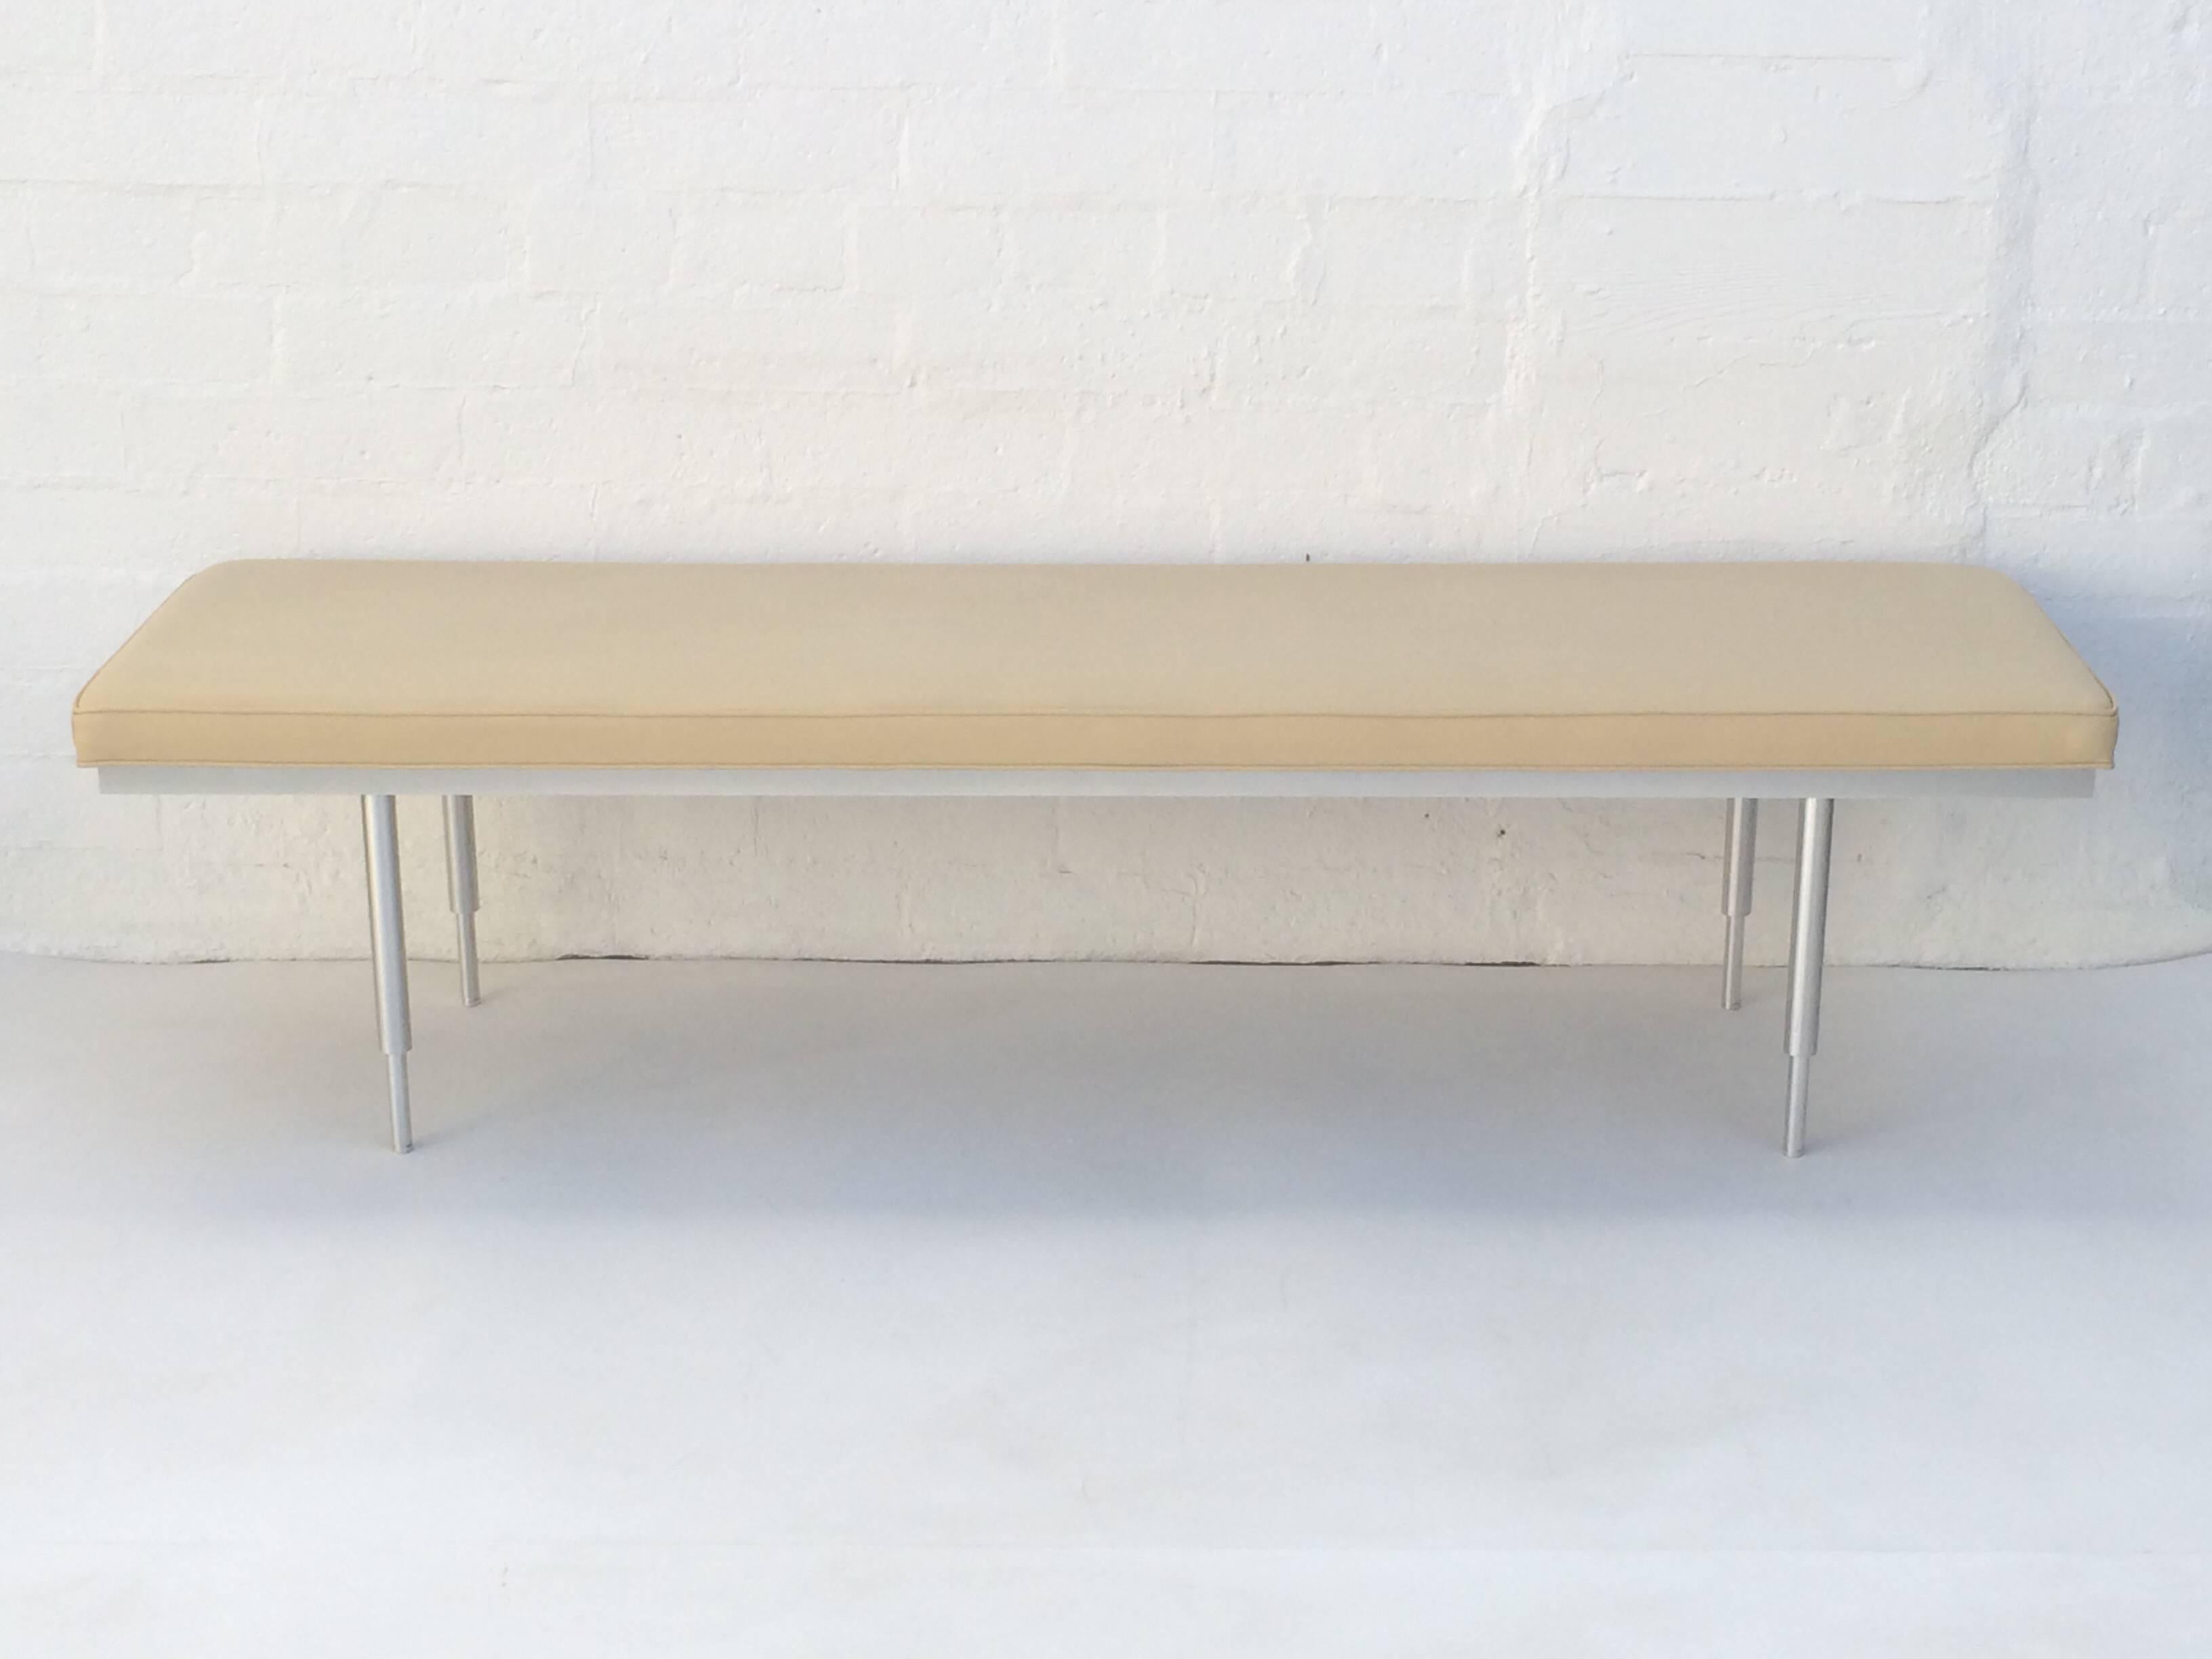 A 1980s brushed aluminum with soft leather bench.
Very well constructed.
The legs are adjustable for two different positions, they unscrew and there are screw holes that are closer together or farther away at the end.